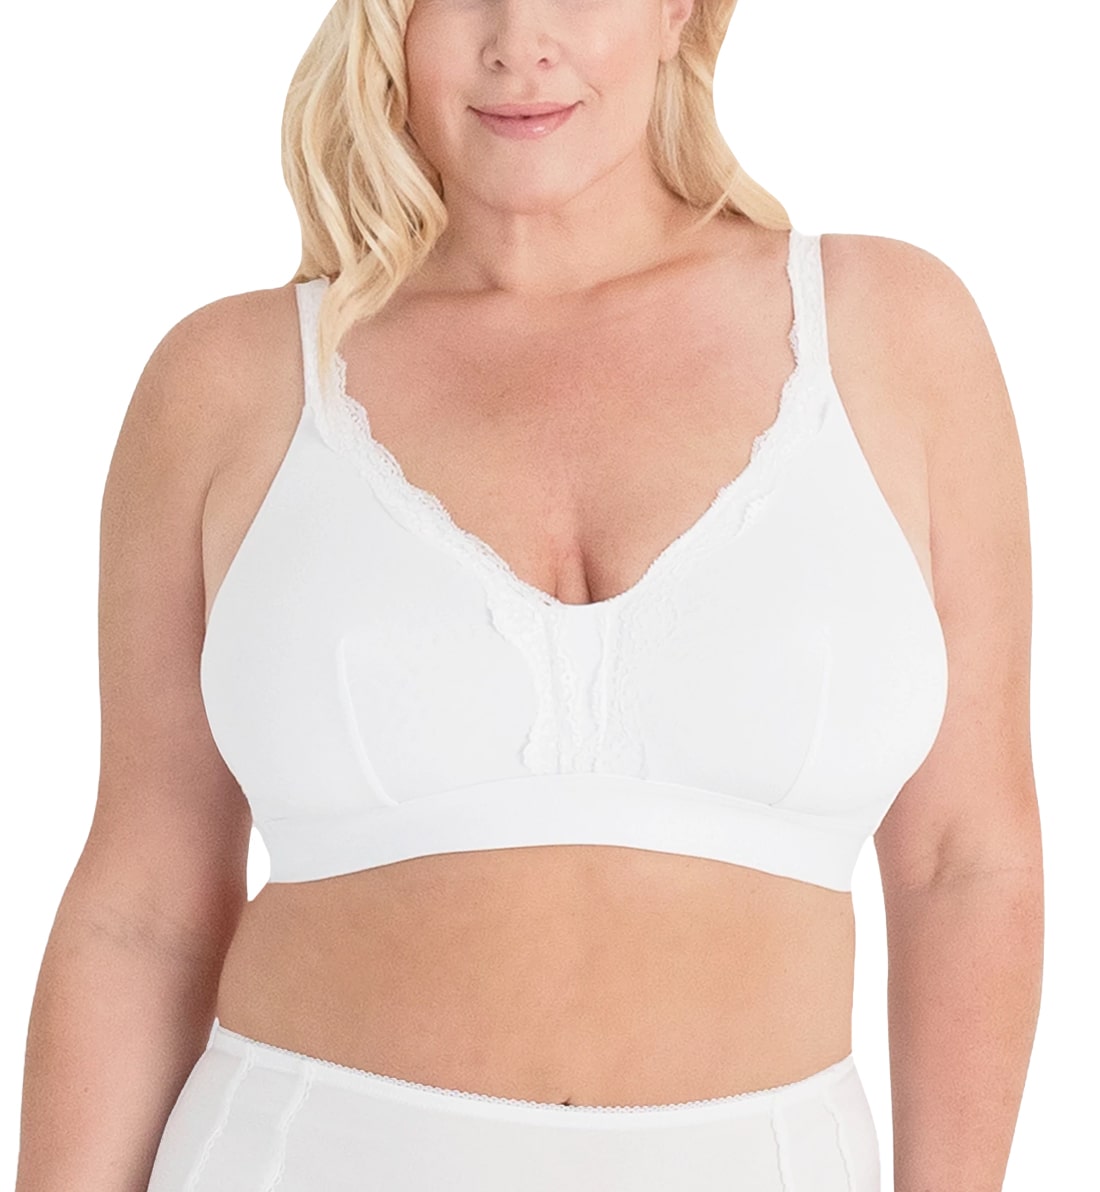 Leading Lady Wirefree Lace Trim Comfort Softcup Bra (5072),36 B/C/D,White - White,36 B/C/D